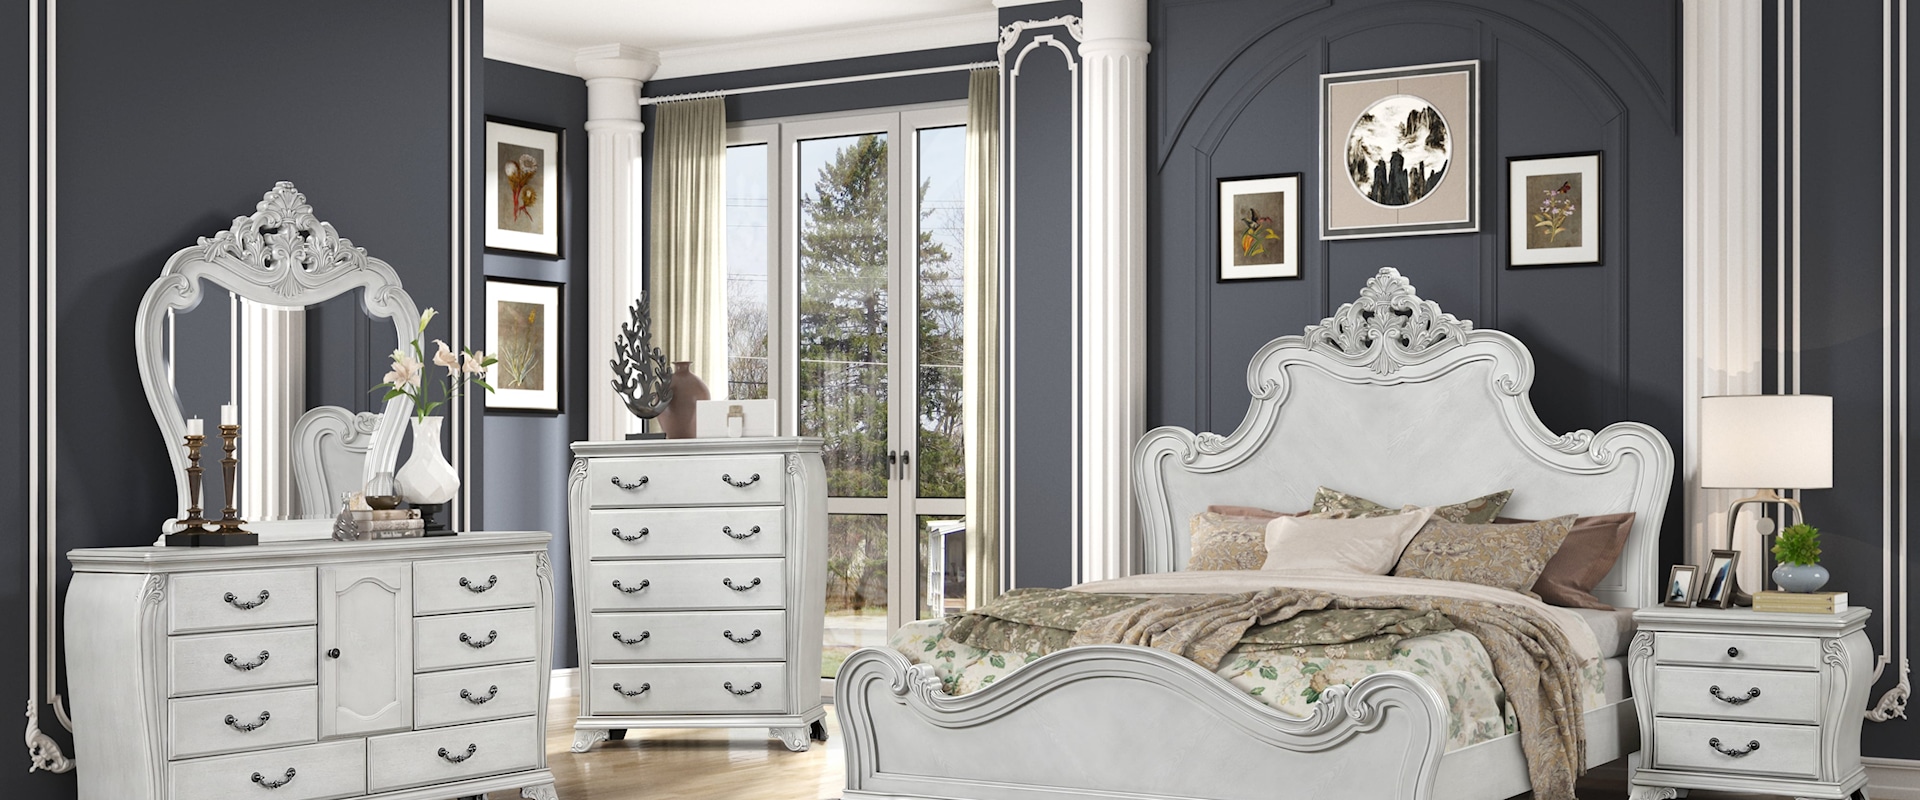 3-Piece Traditional Queen Arched Bedroom Set